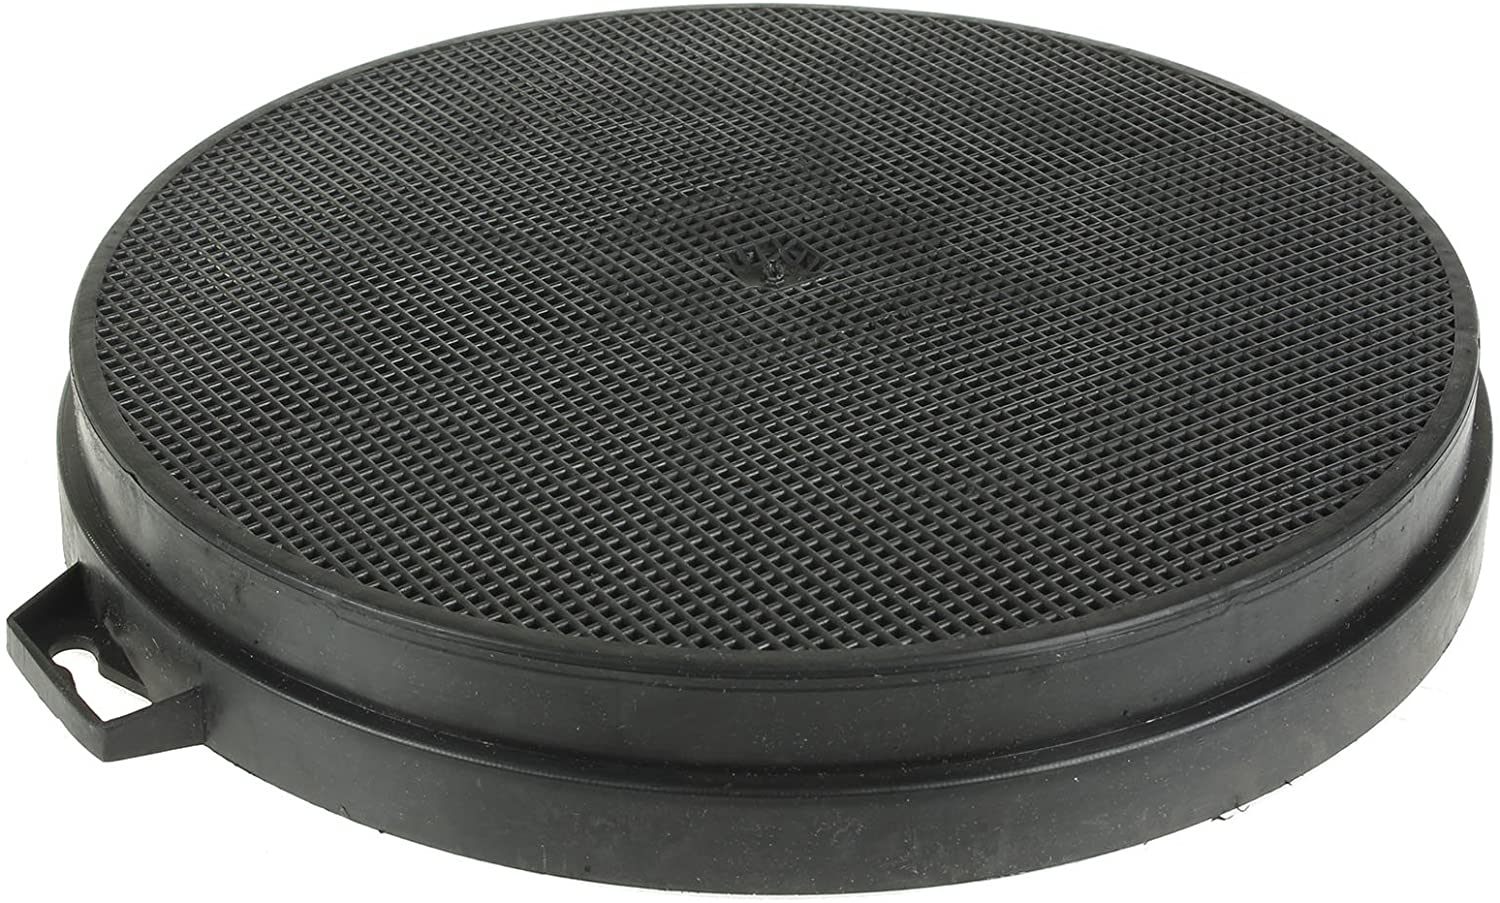 Carbon Charcoal Vent Filter for Howdens Lamona Cooker Extractor Hood